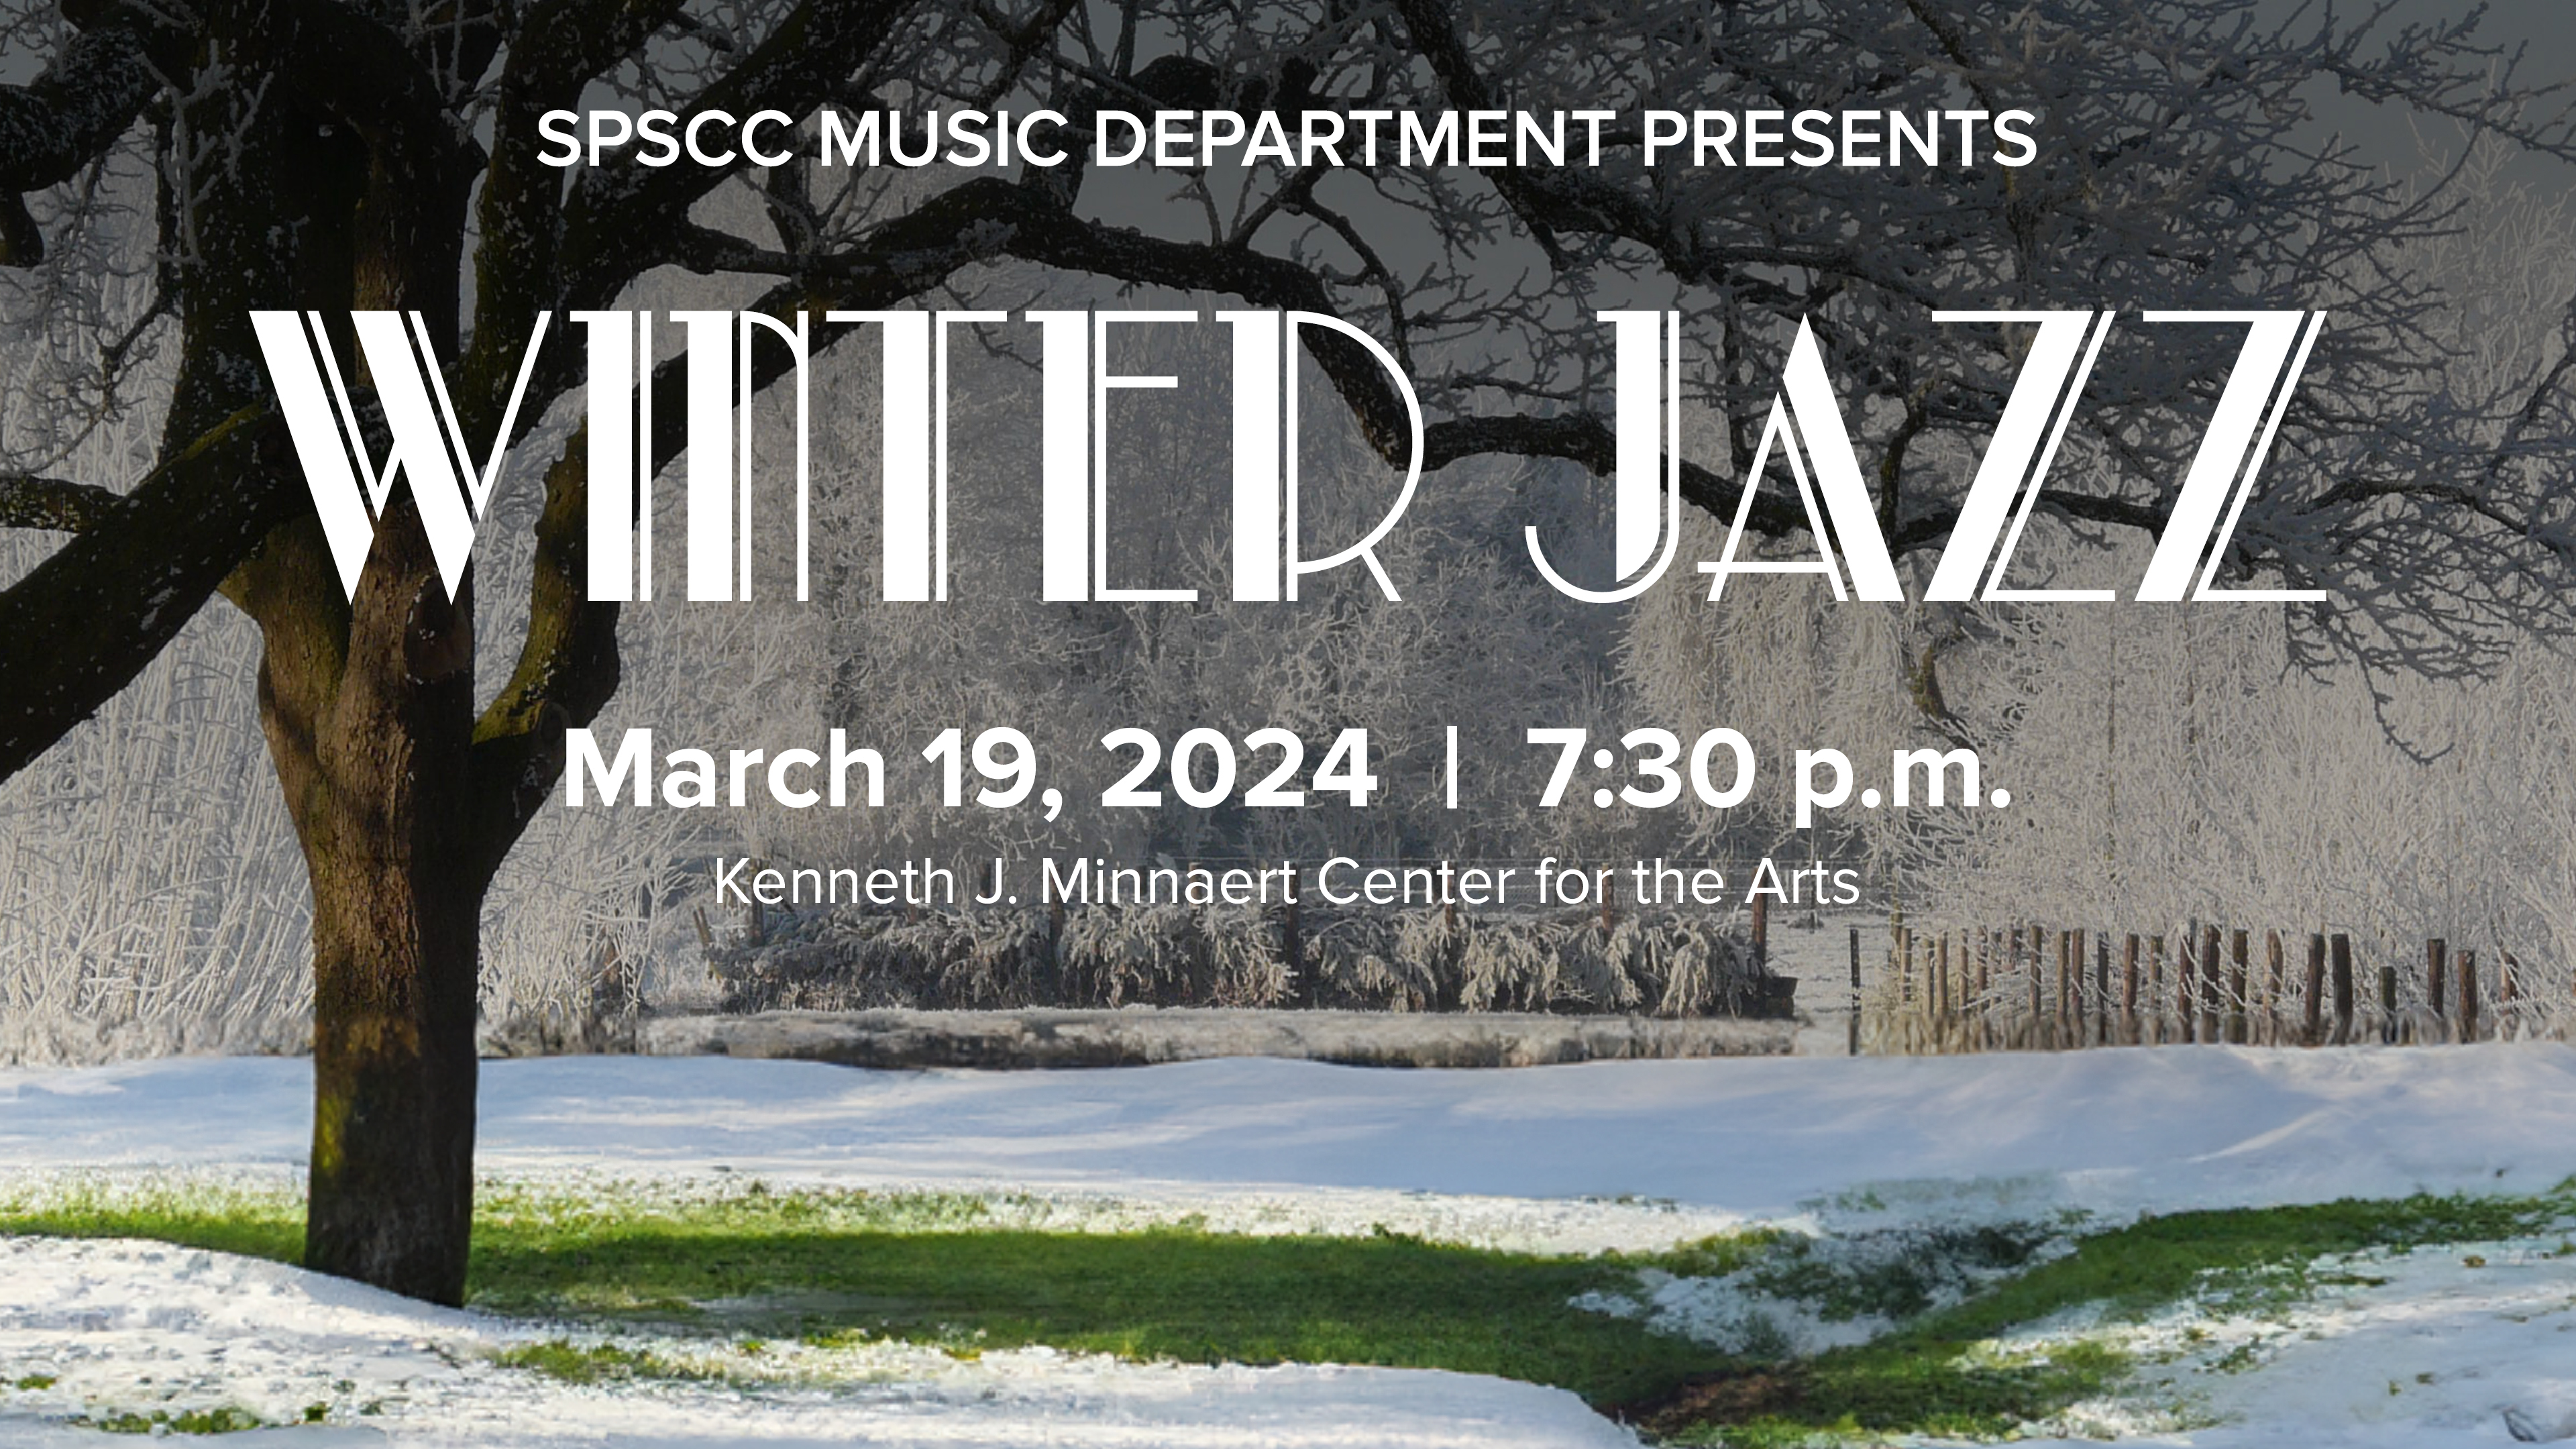 SPSCC Music Department presents Winter Jazz. Monday, March 19, 2024 at 7:30 p.m. Kenneth J. Minnaert Center for the Arts. Sponsored by R.L. Ray Violin Shop.